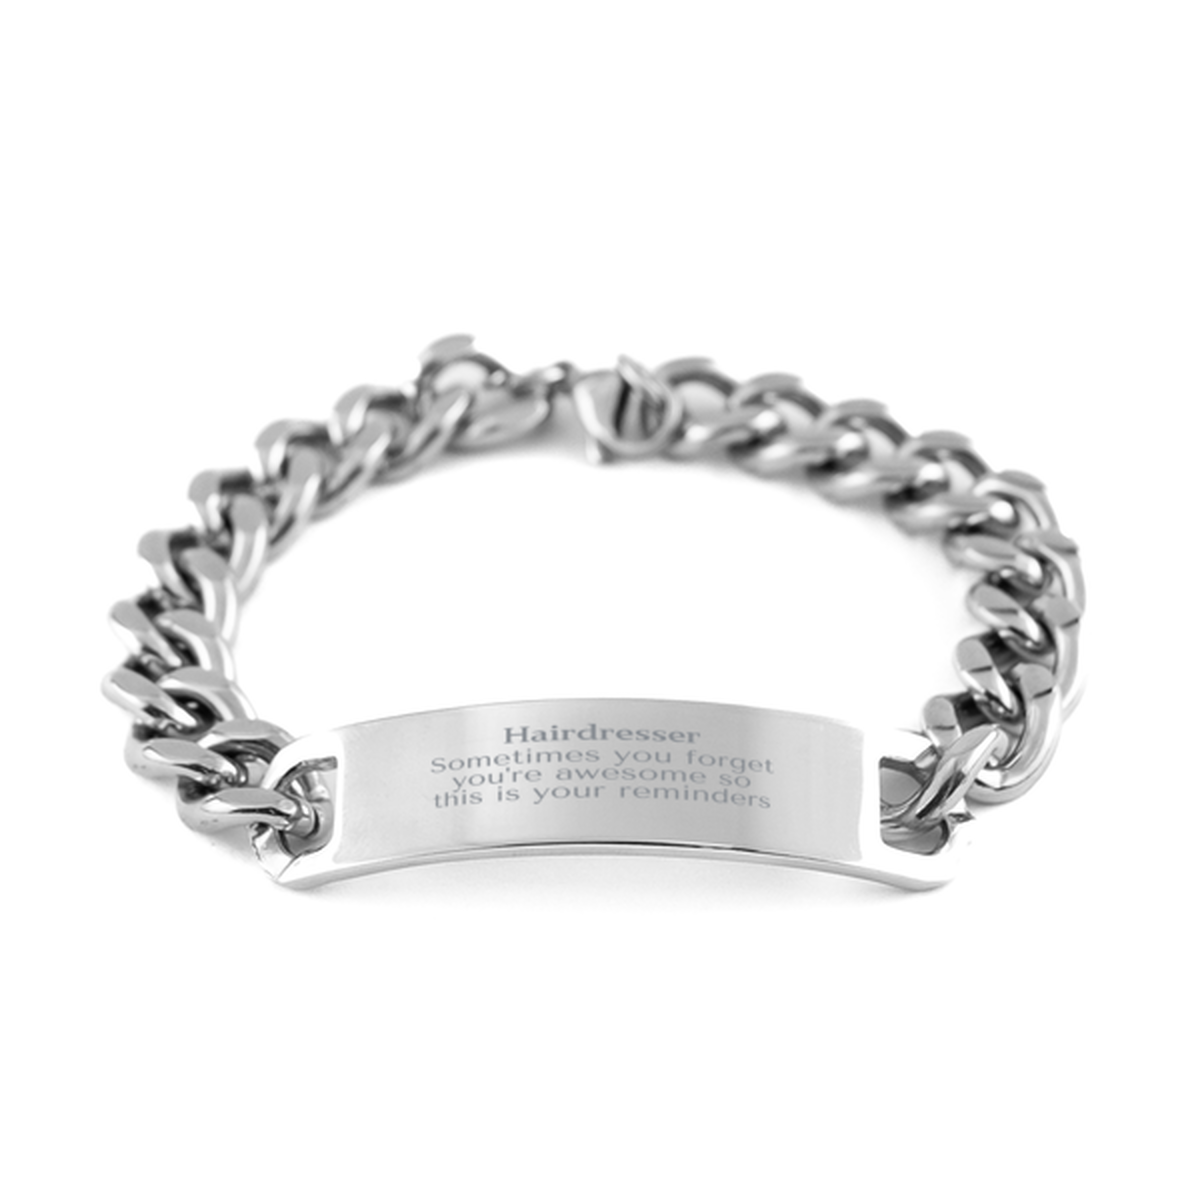 Sentimental Hairdresser Cuban Chain Stainless Steel Bracelet, Hairdresser Sometimes you forget you're awesome so this is your reminders, Graduation Christmas Birthday Gifts for Hairdresser, Men, Women, Coworkers